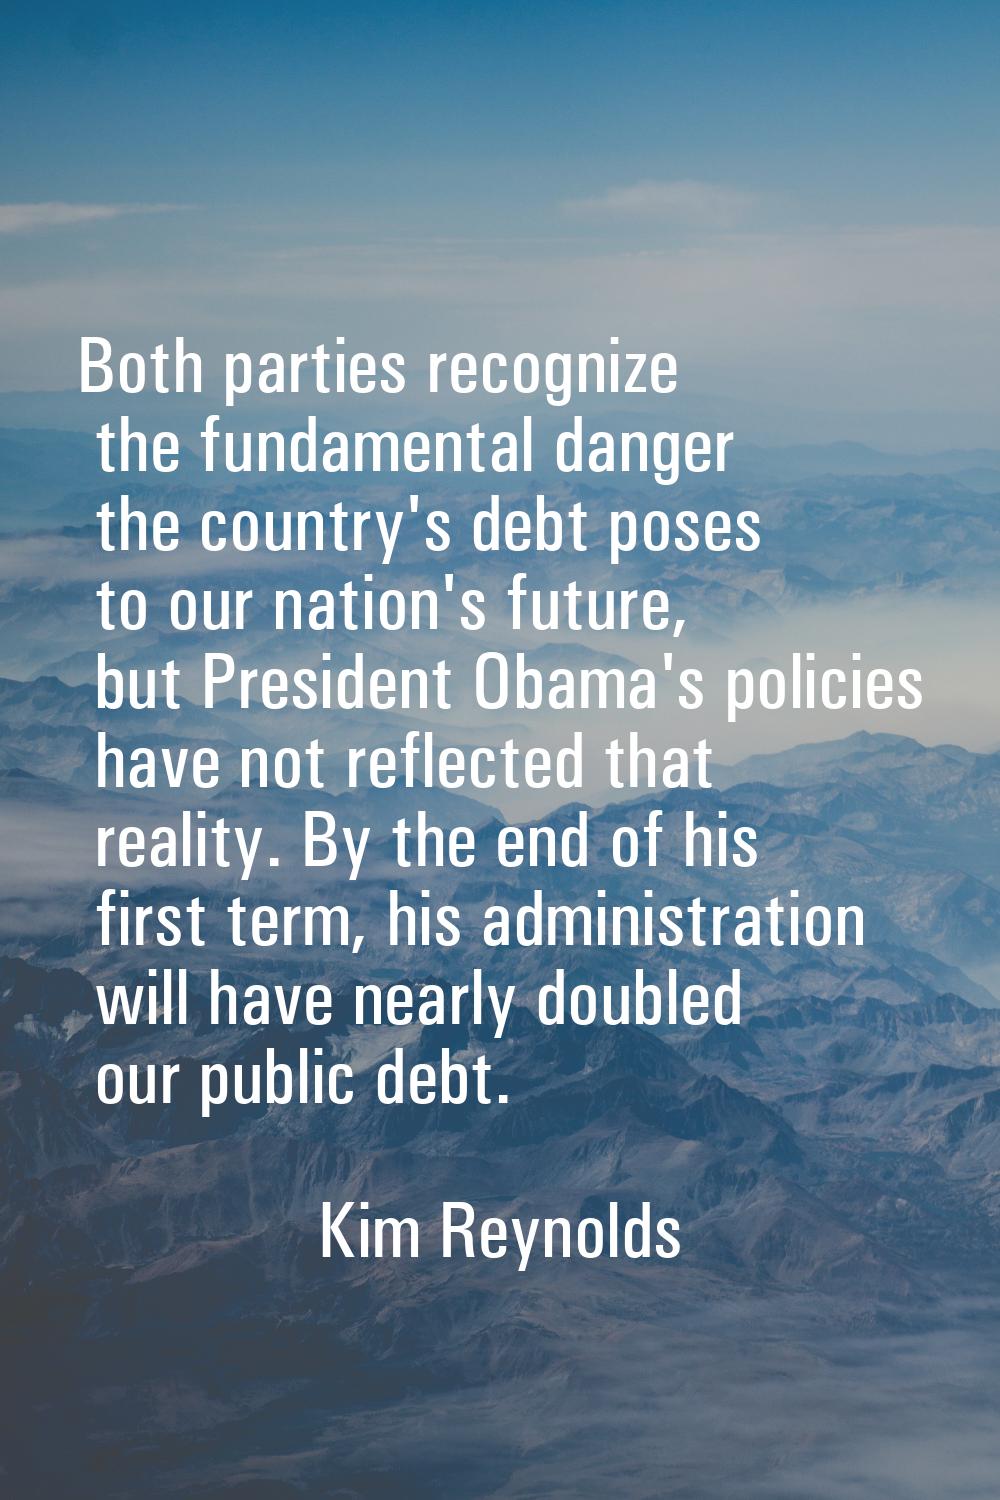 Both parties recognize the fundamental danger the country's debt poses to our nation's future, but 